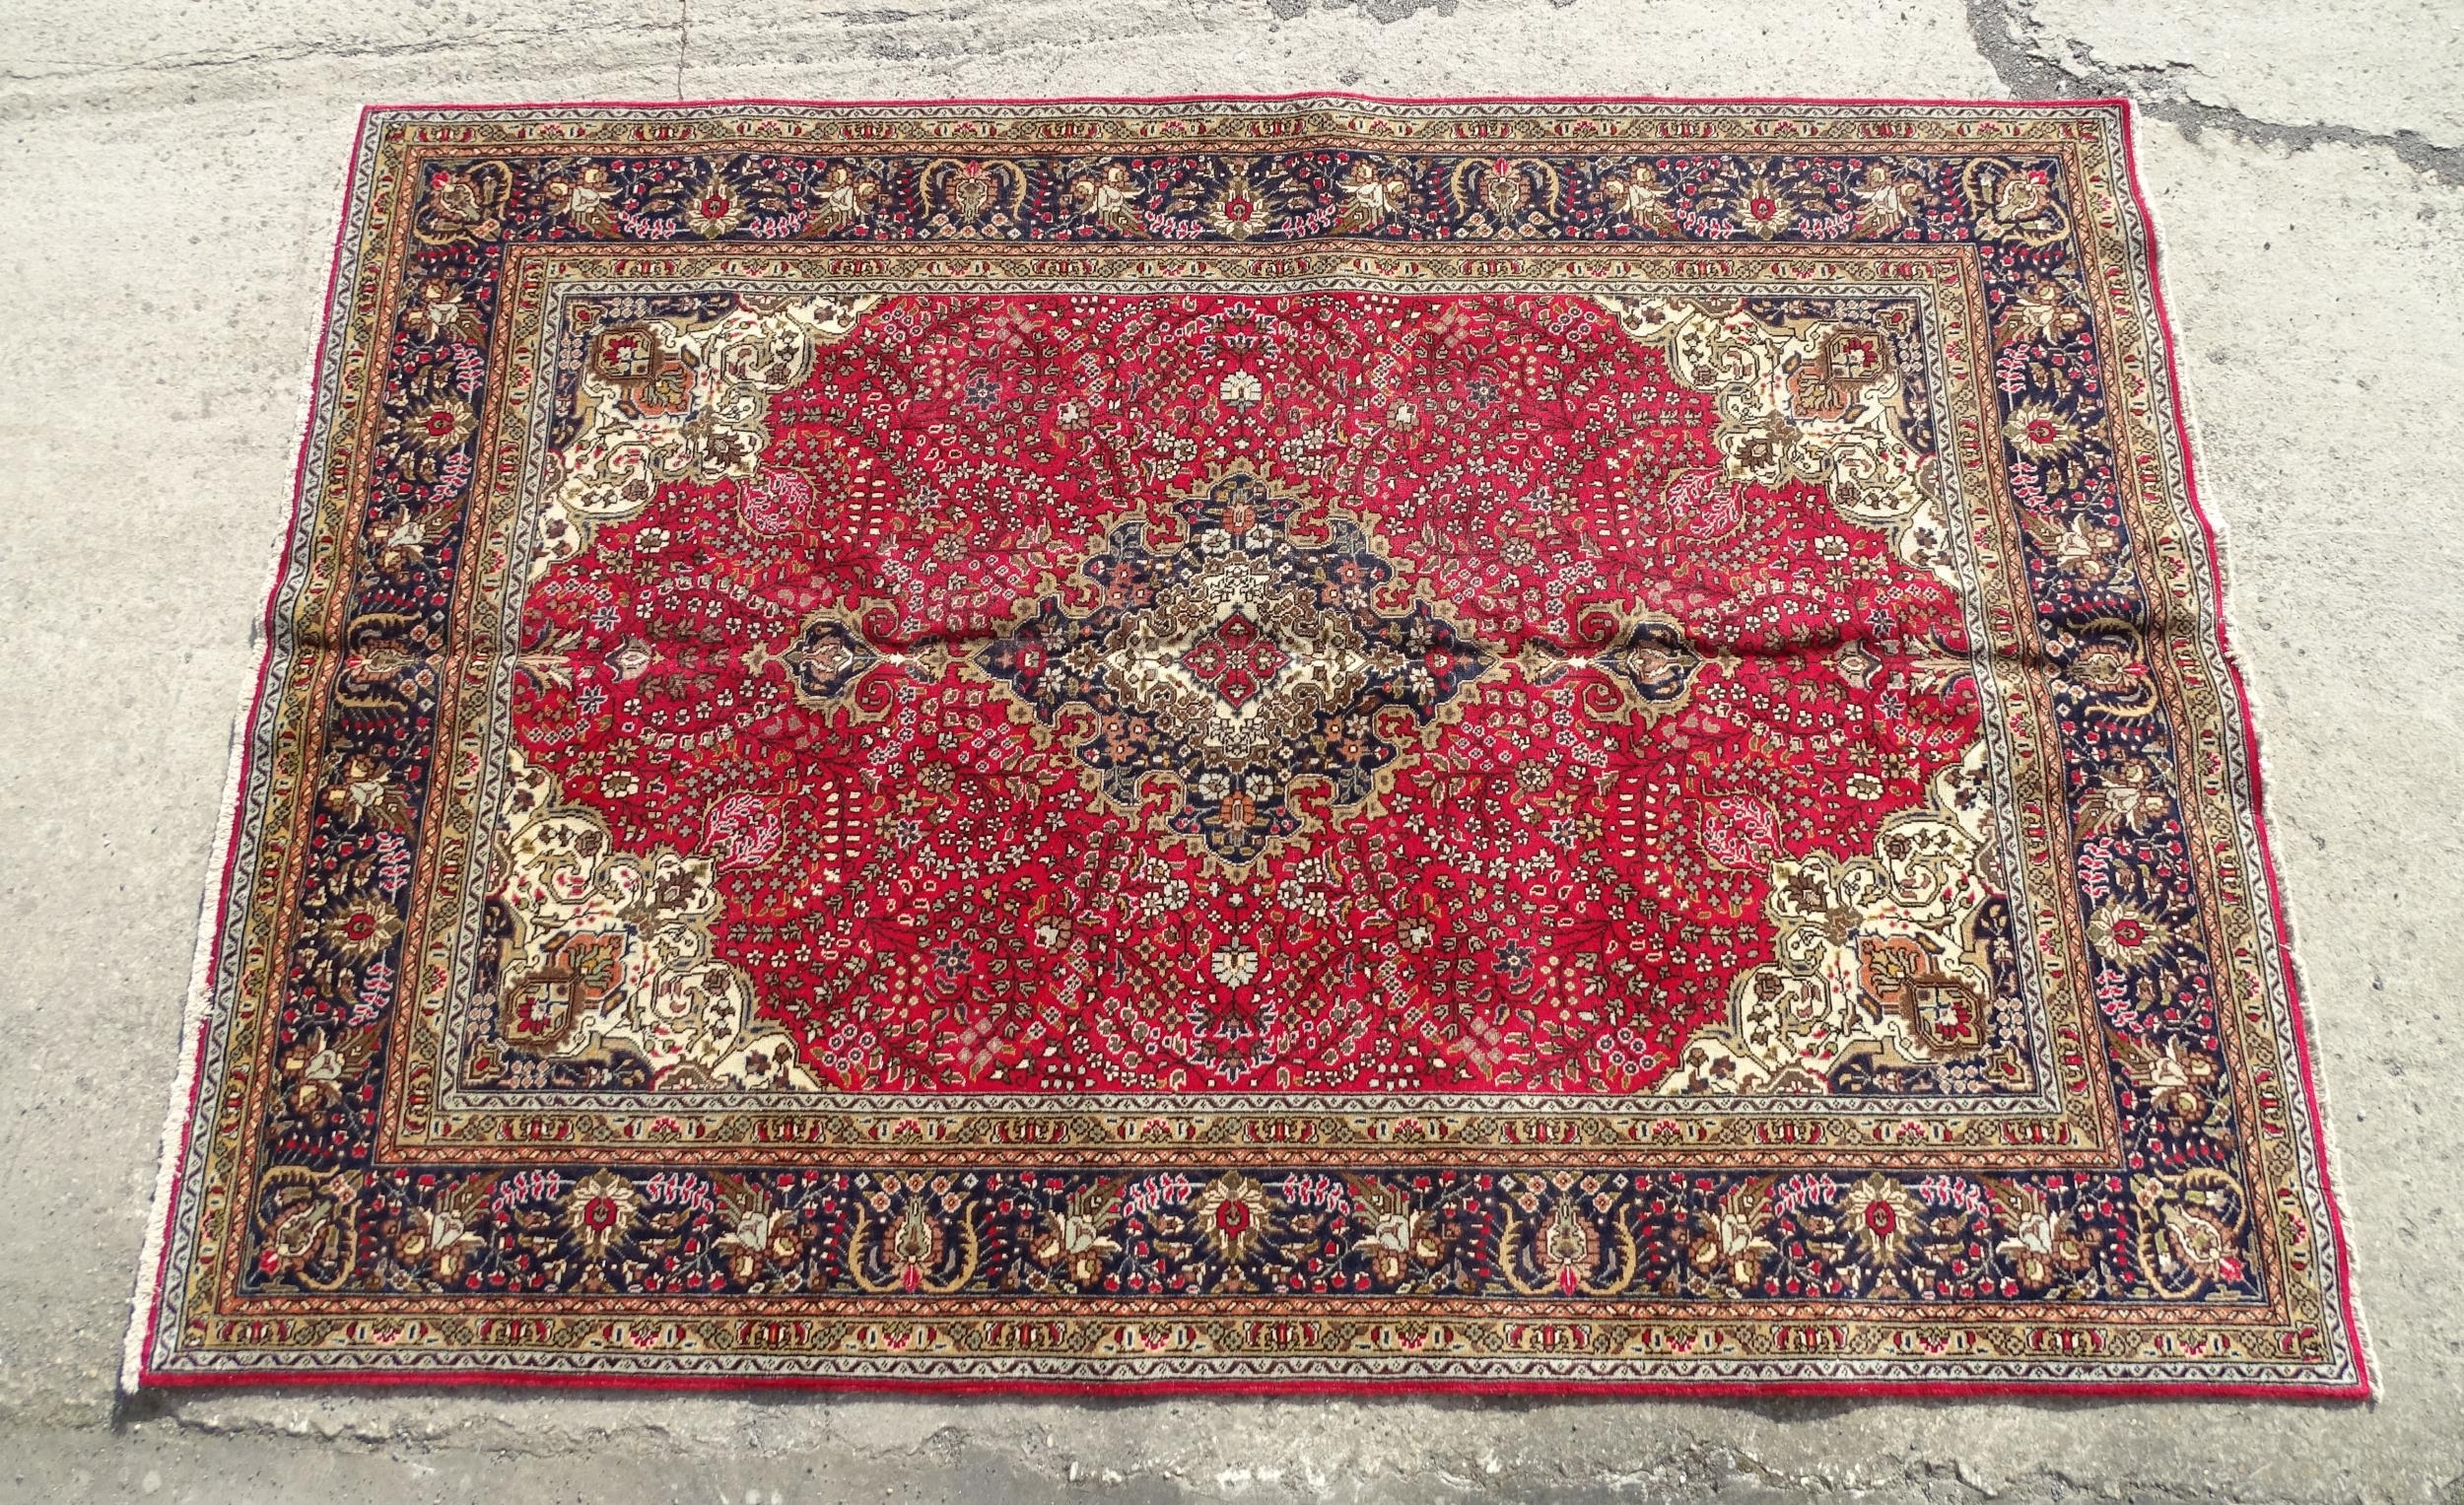 Carpet / Rug : A North West Persian Tabriz carpet, the red ground with central medallion of floral